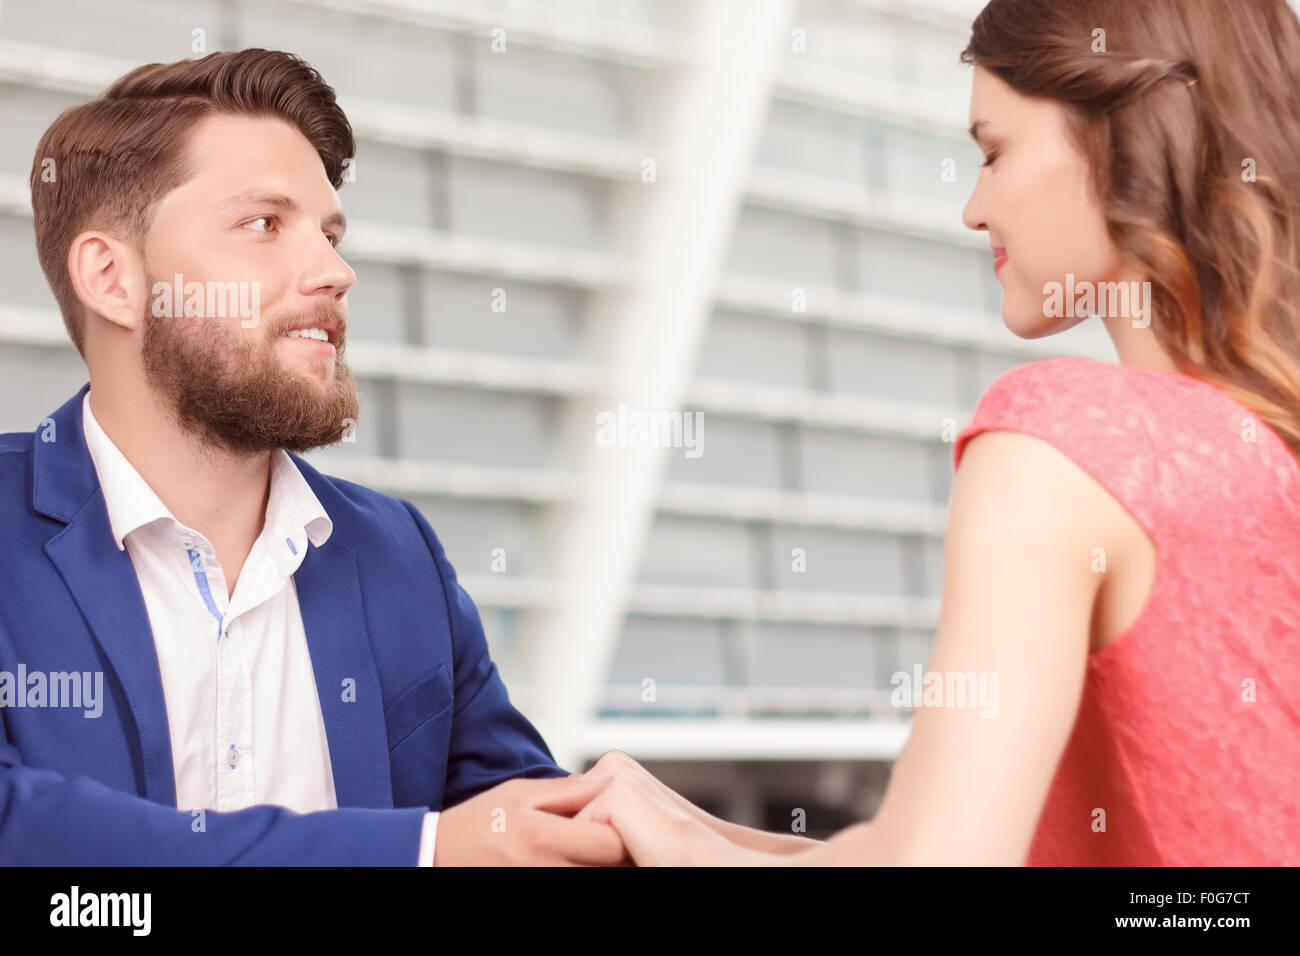 Man holding hands of his smiling girlfriend Stock Photo